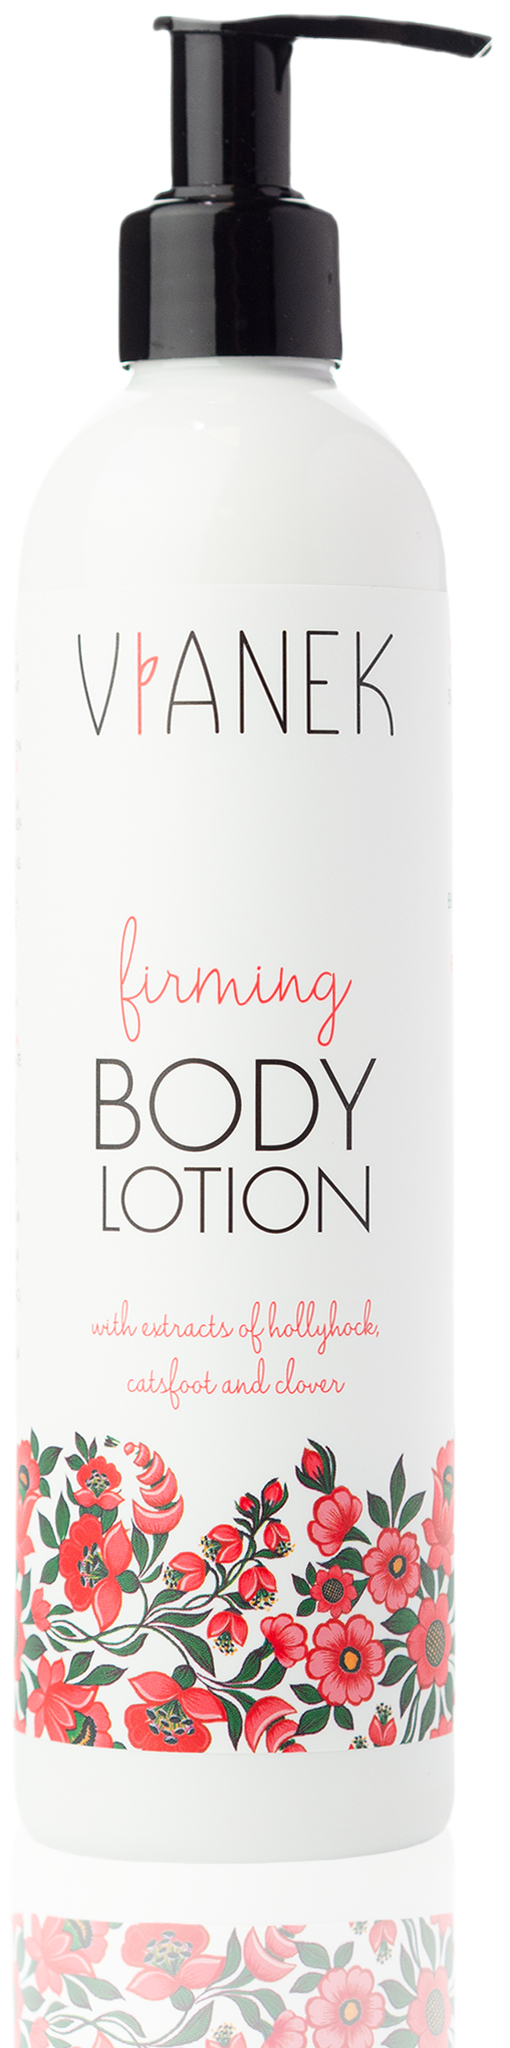 Firming Body Lotion with extracts of Hollyhock, Catsfoot & Clover